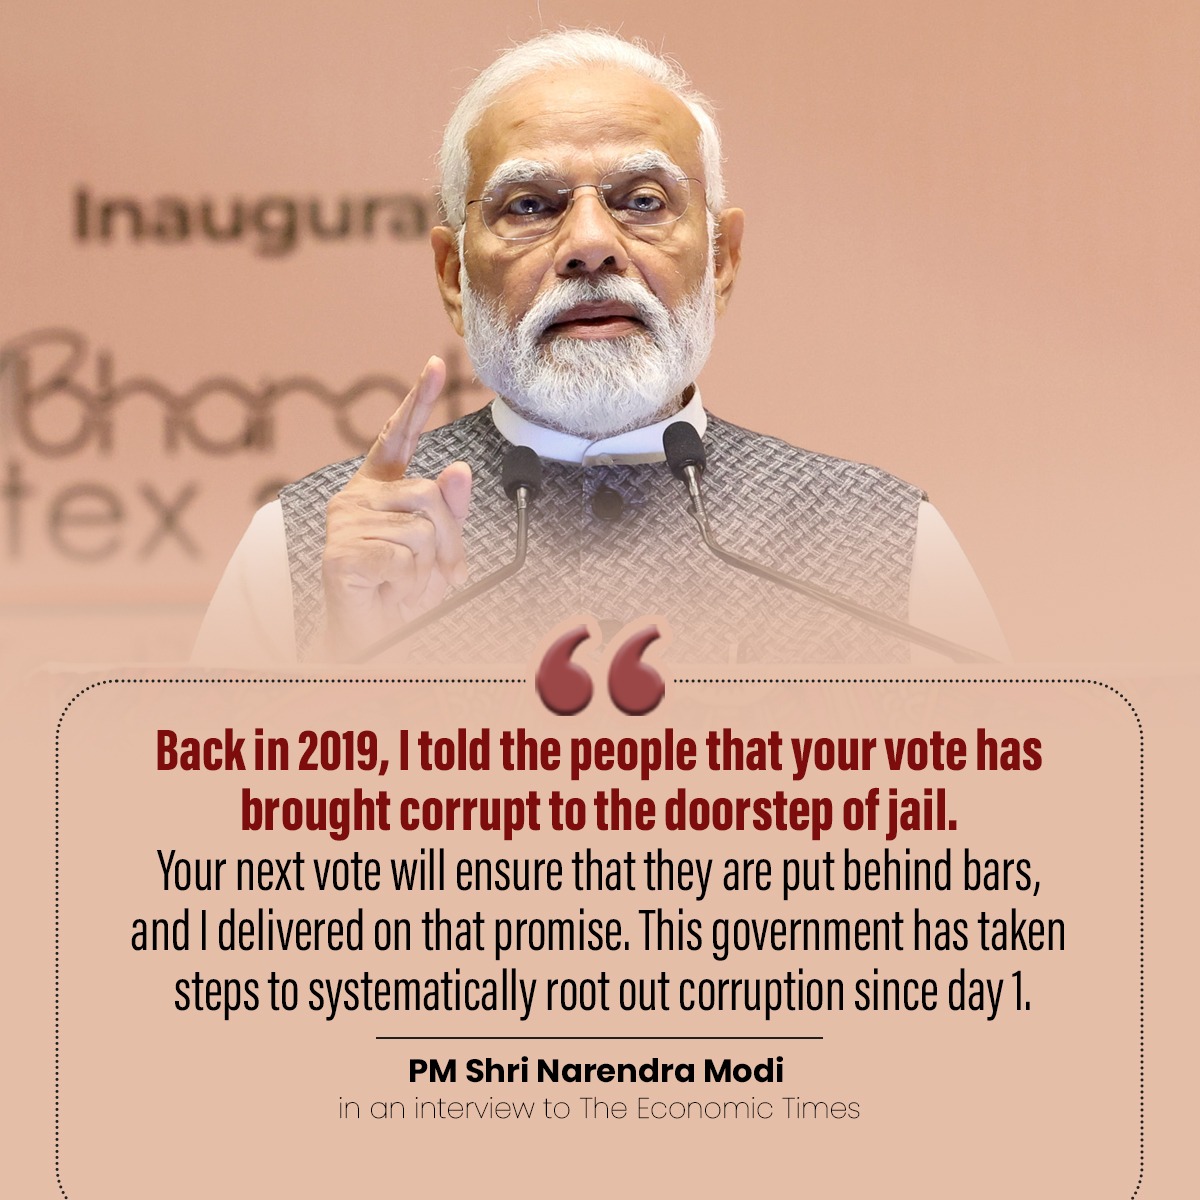 Back in 2019, I told the people that your vote has brought corrupt to the doorstep of jail. - PM Shri @narendramodi